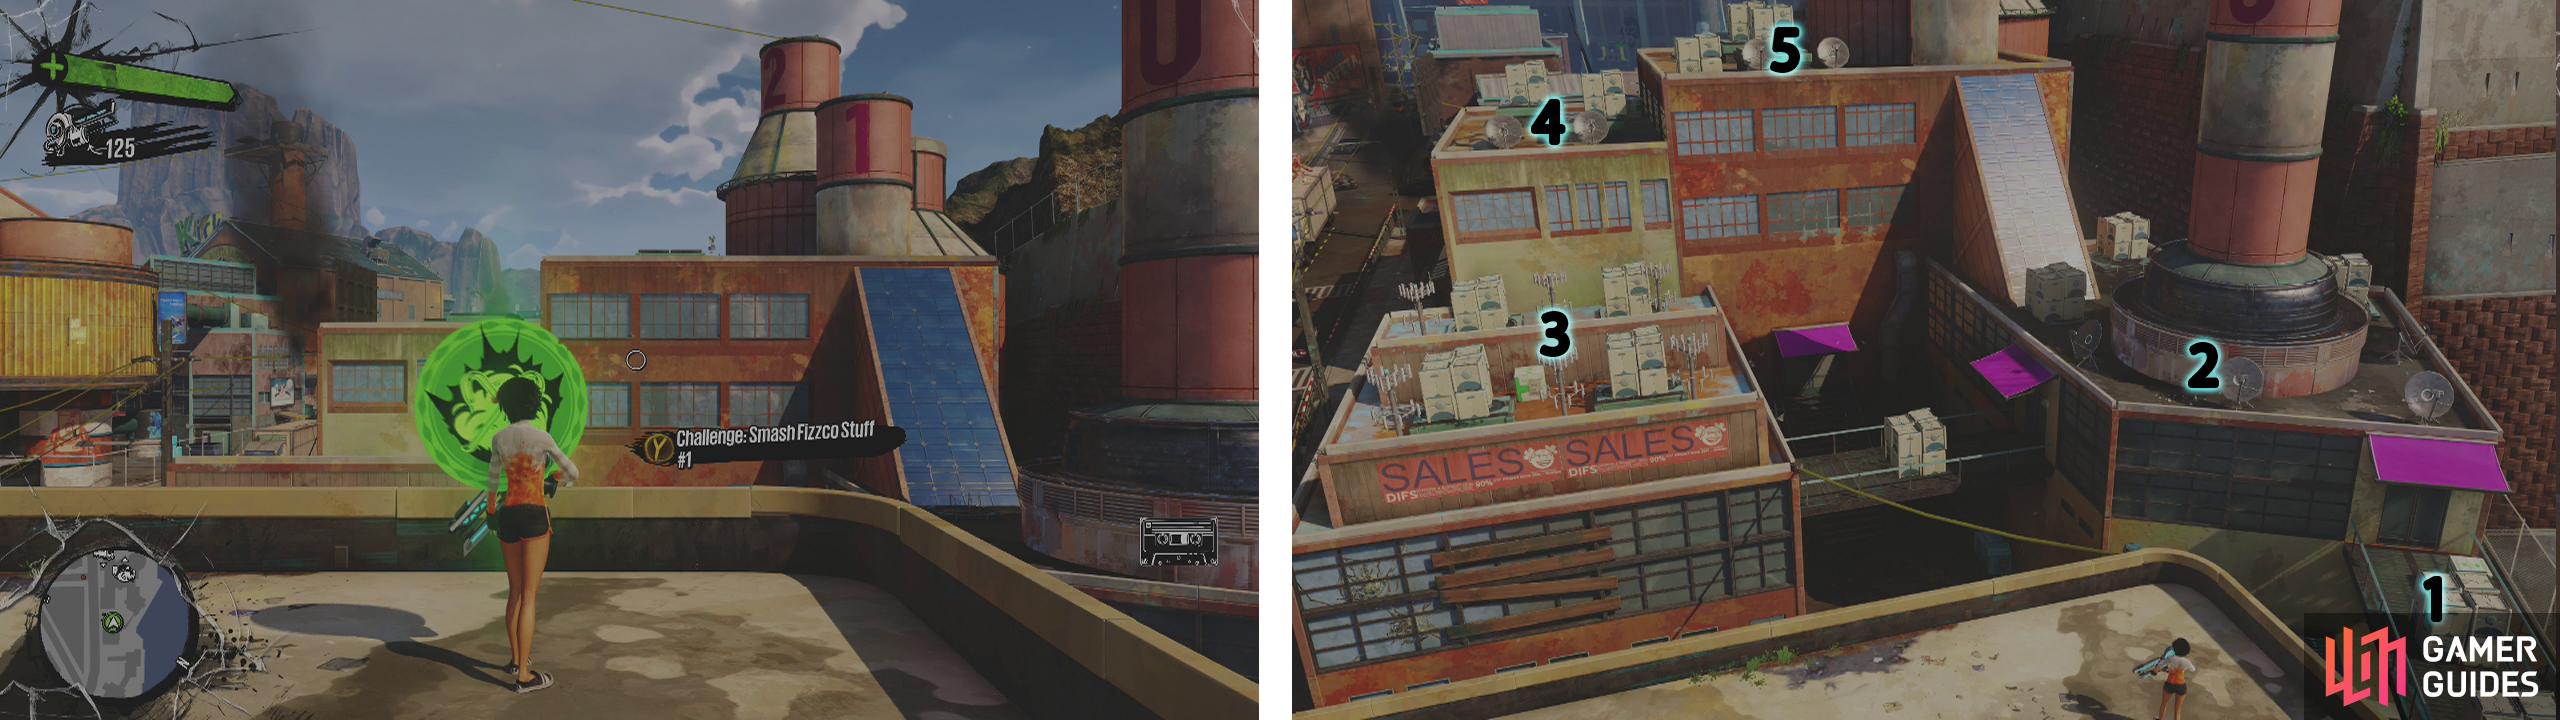 You can begin the challenge here (left). Here is our suggested route of destruction through the area (right).